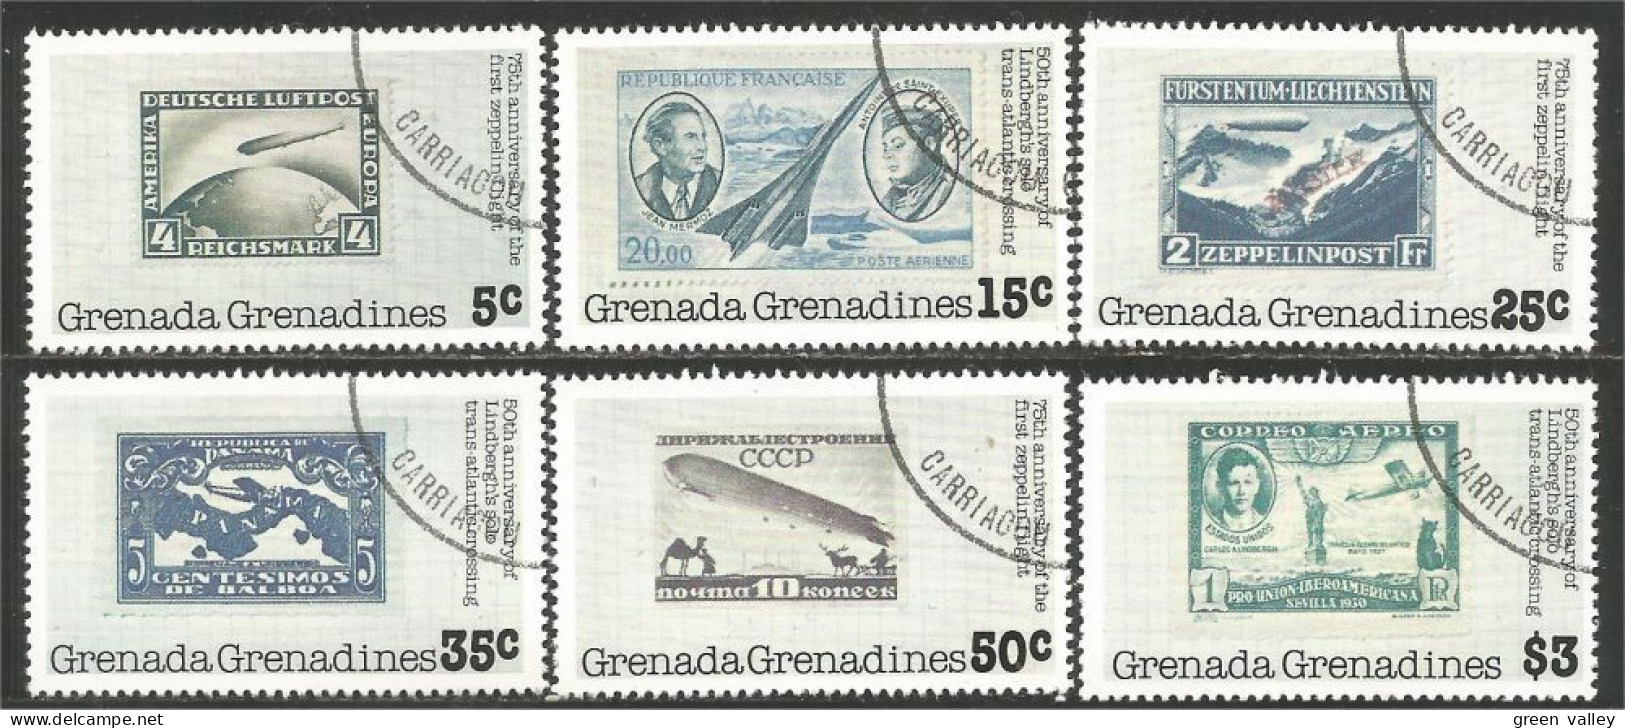 TT-27 Grenada Timbres Sur Timbres Stamps On Stamps - Timbres Sur Timbres